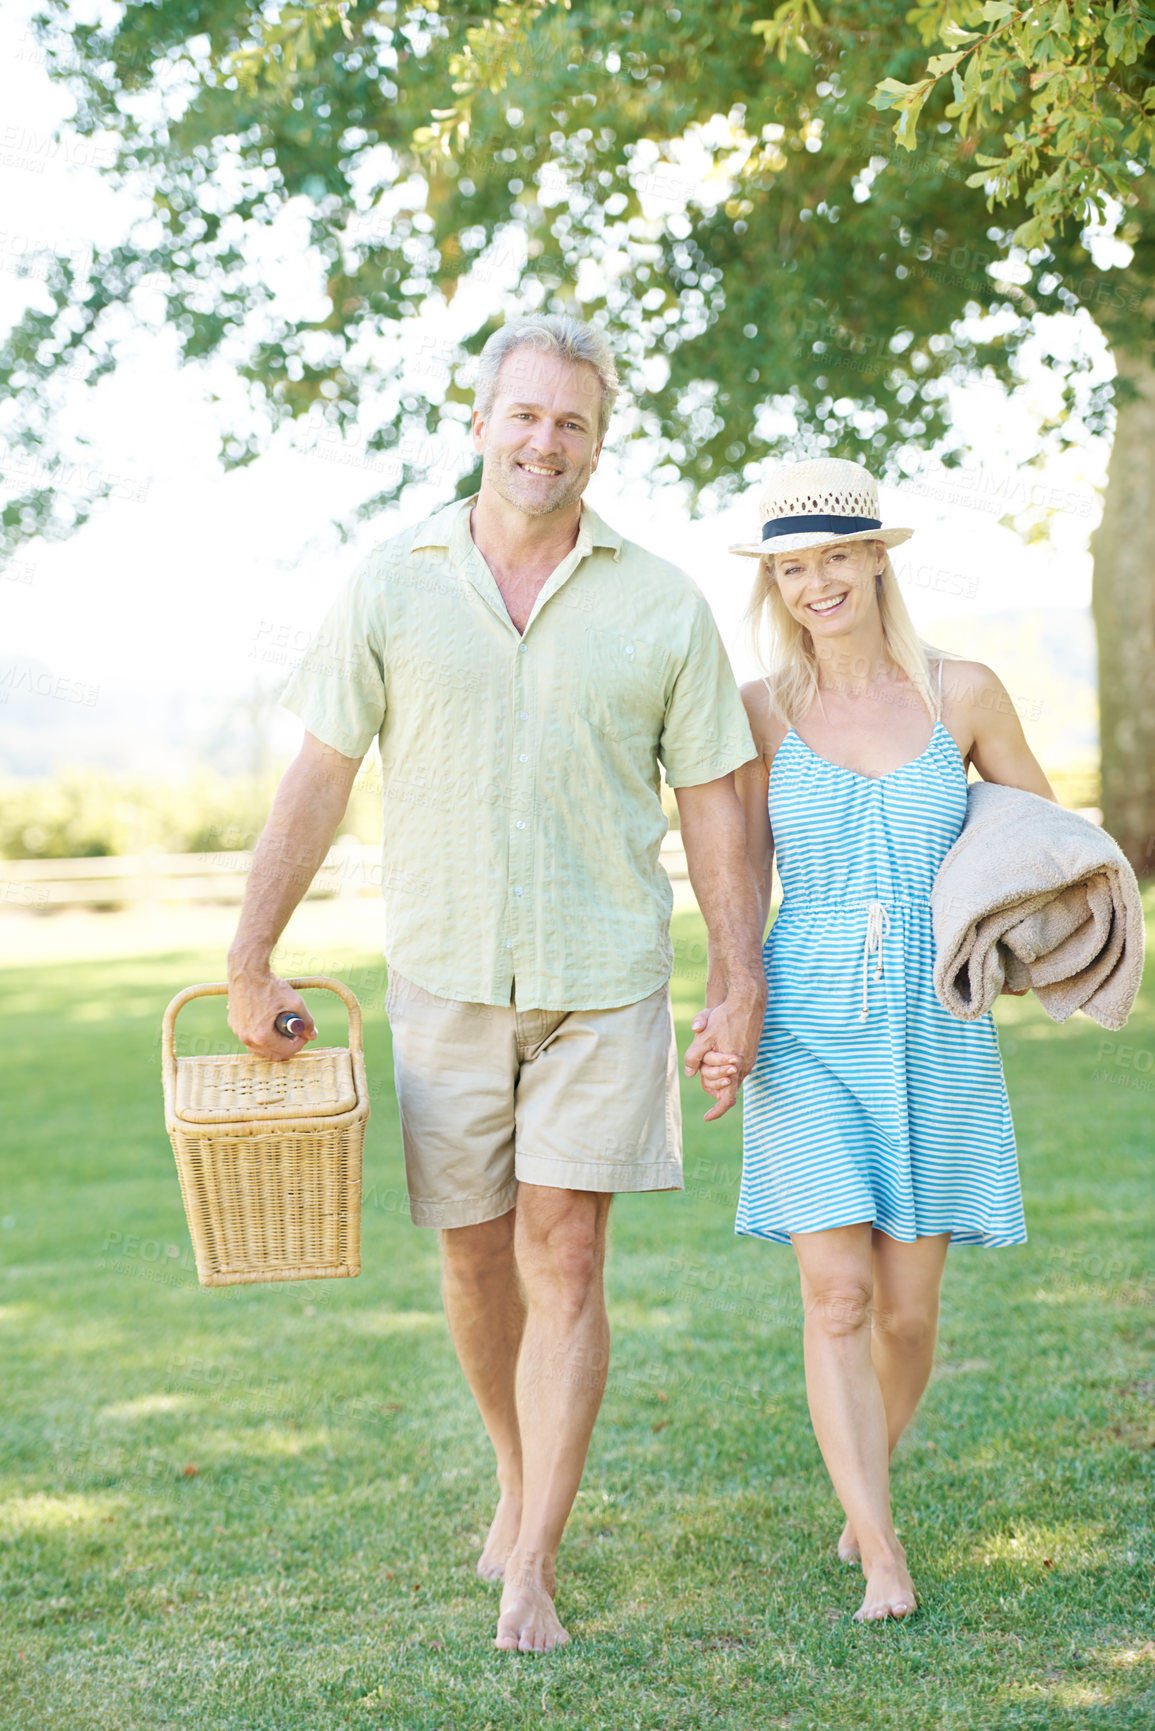 Buy stock photo A happy couple walking in the park looking for a spot to set up their picnic
